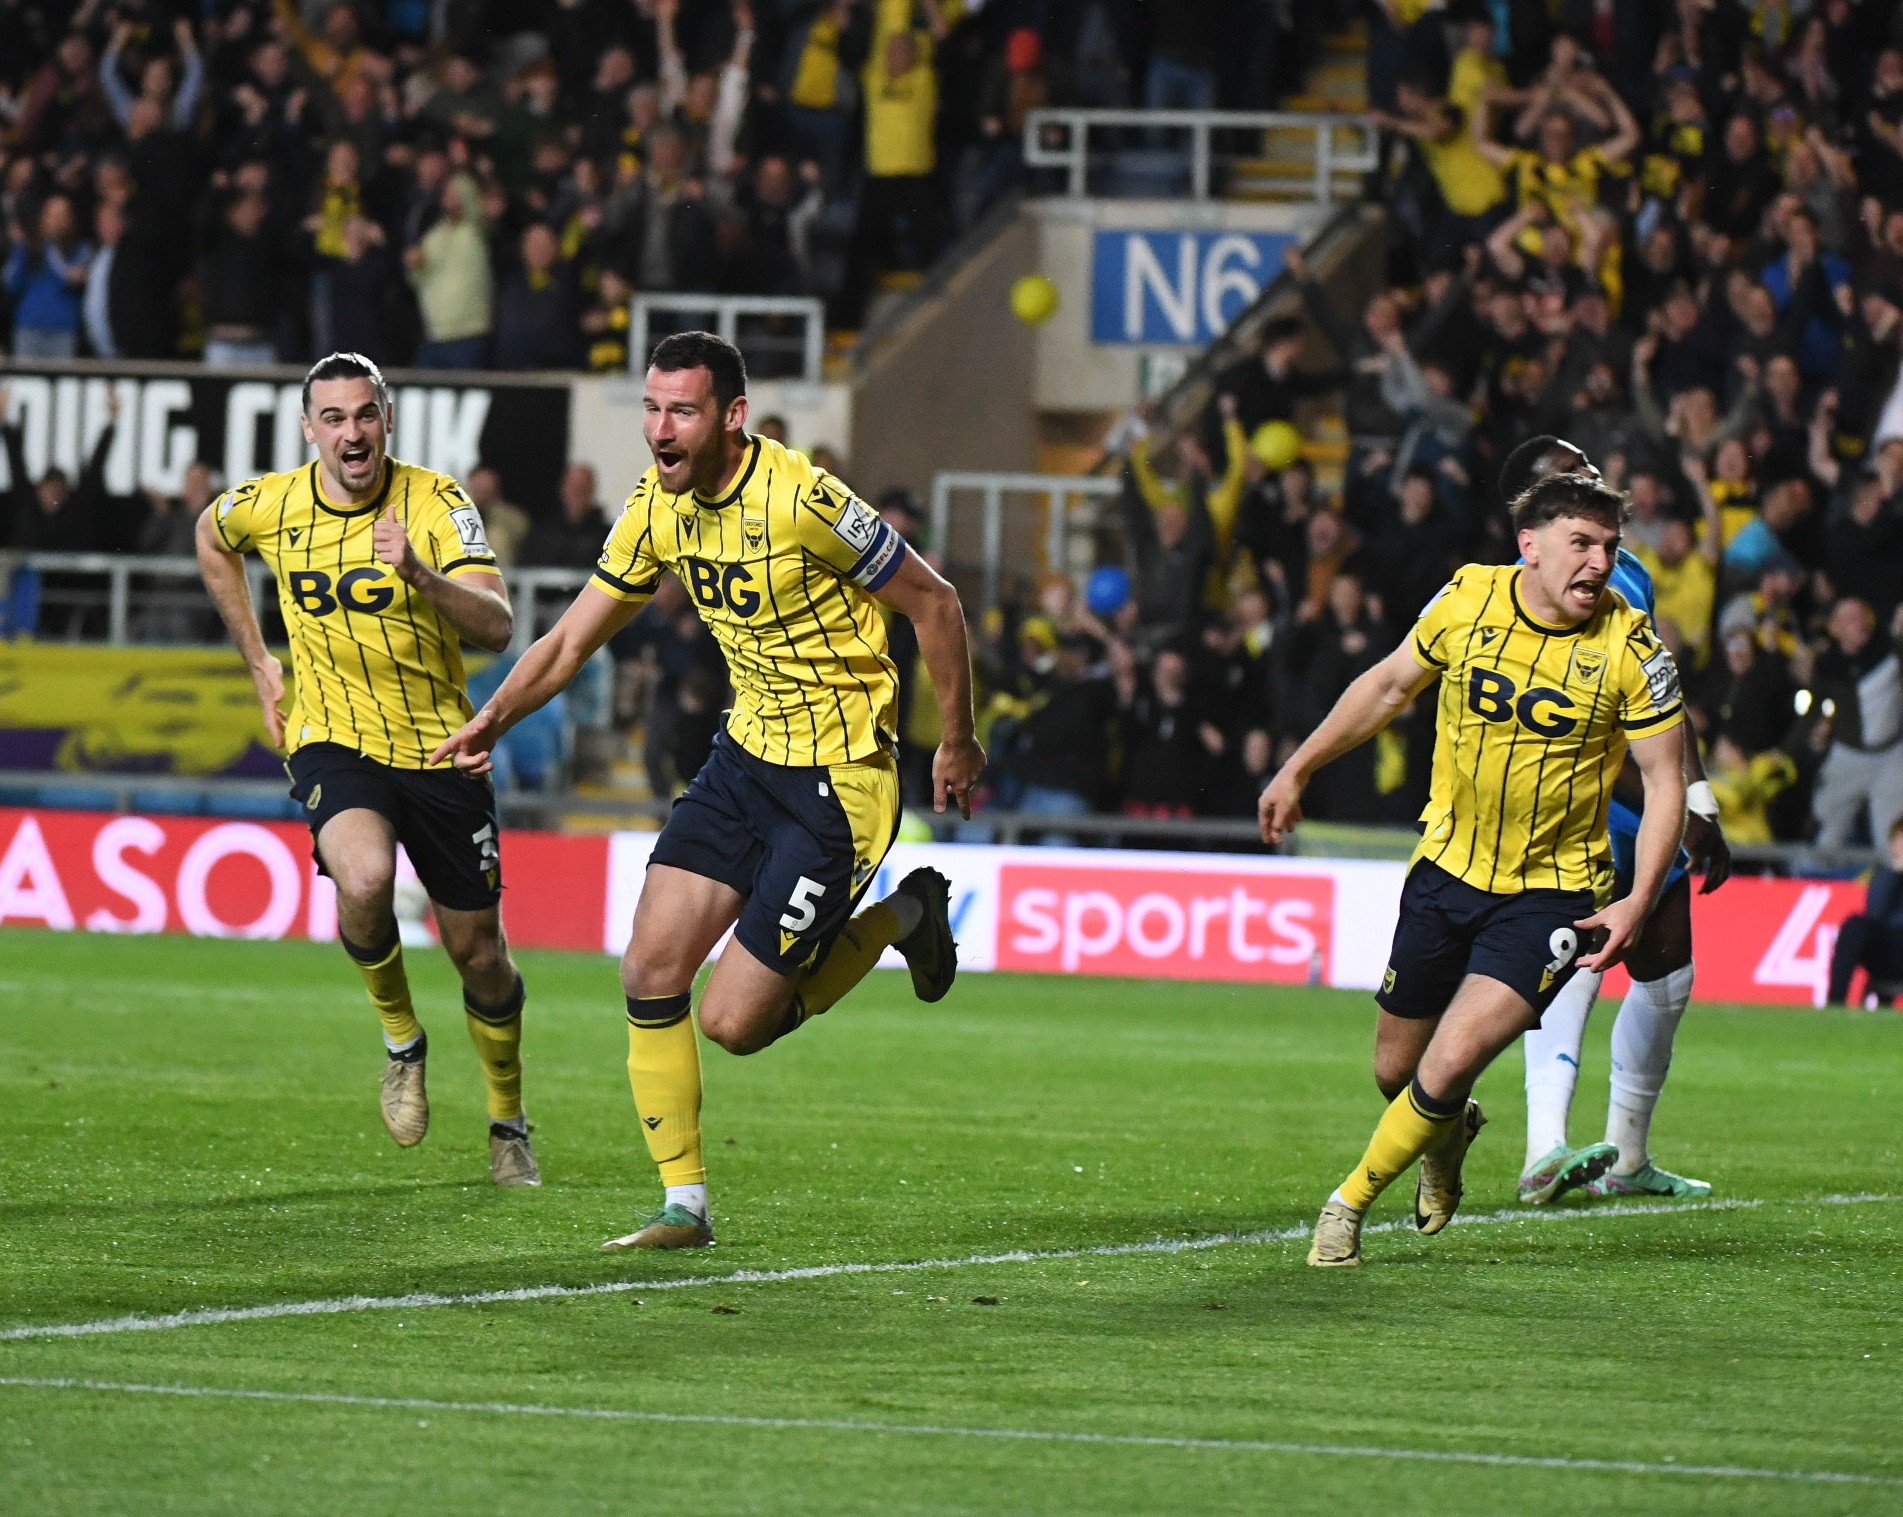 Oxford United beat Peterborough in play-off semi-final first leg